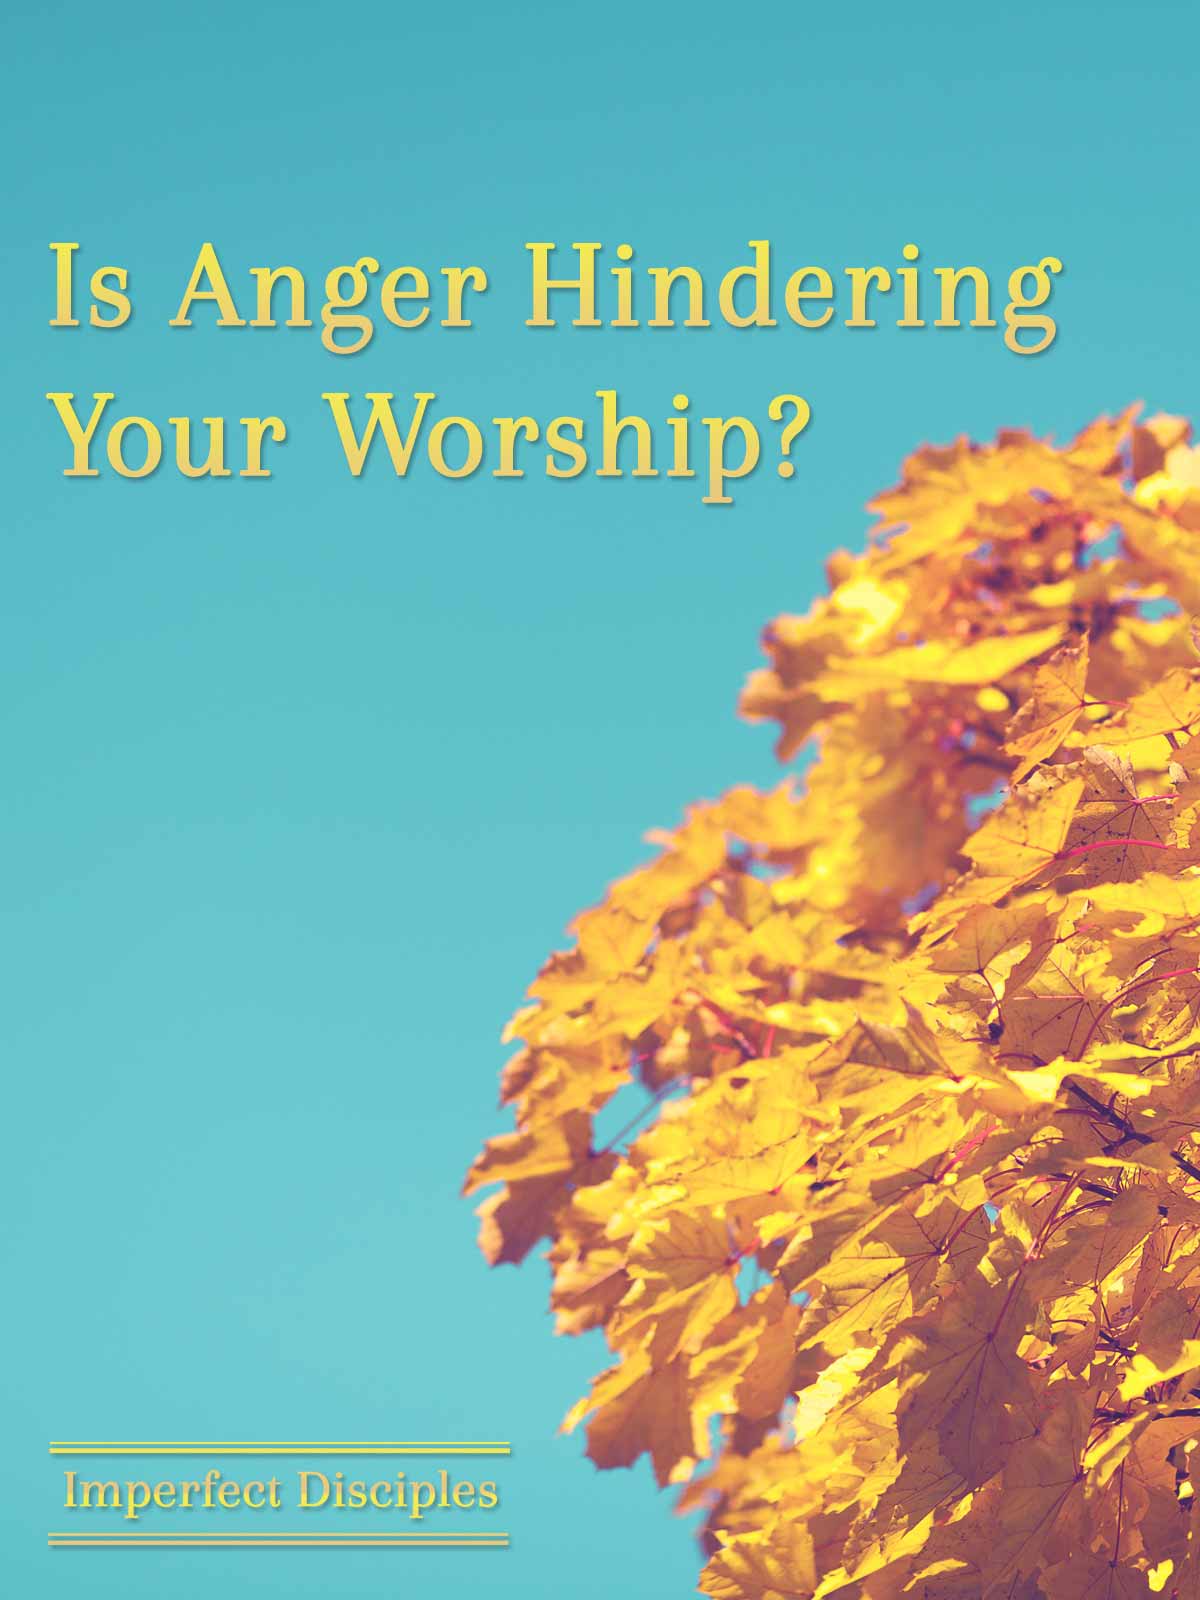 Is Anger Hindering Your Worship?